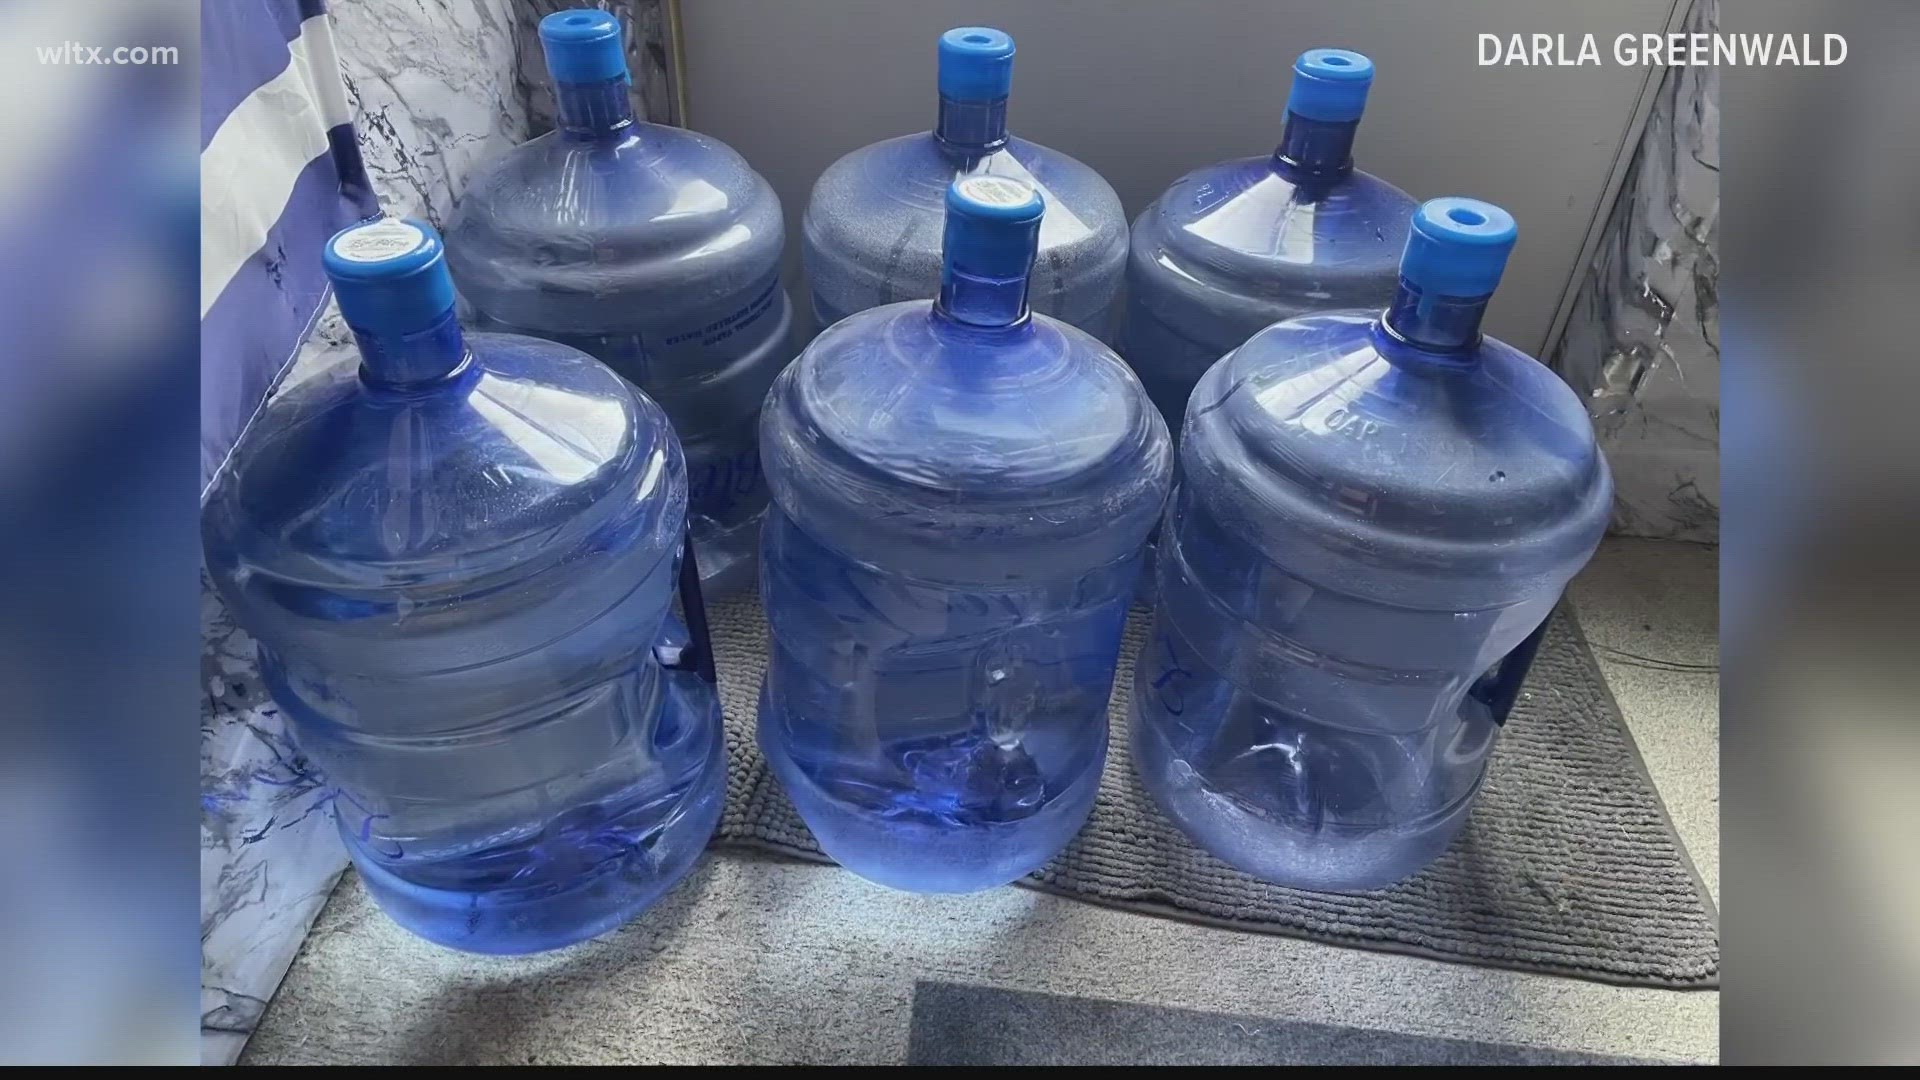 Shaw AFB bas been testing groundwater levels for 'forever chemicals' since 2018.   In 2020 it began giving out bottle water to residents